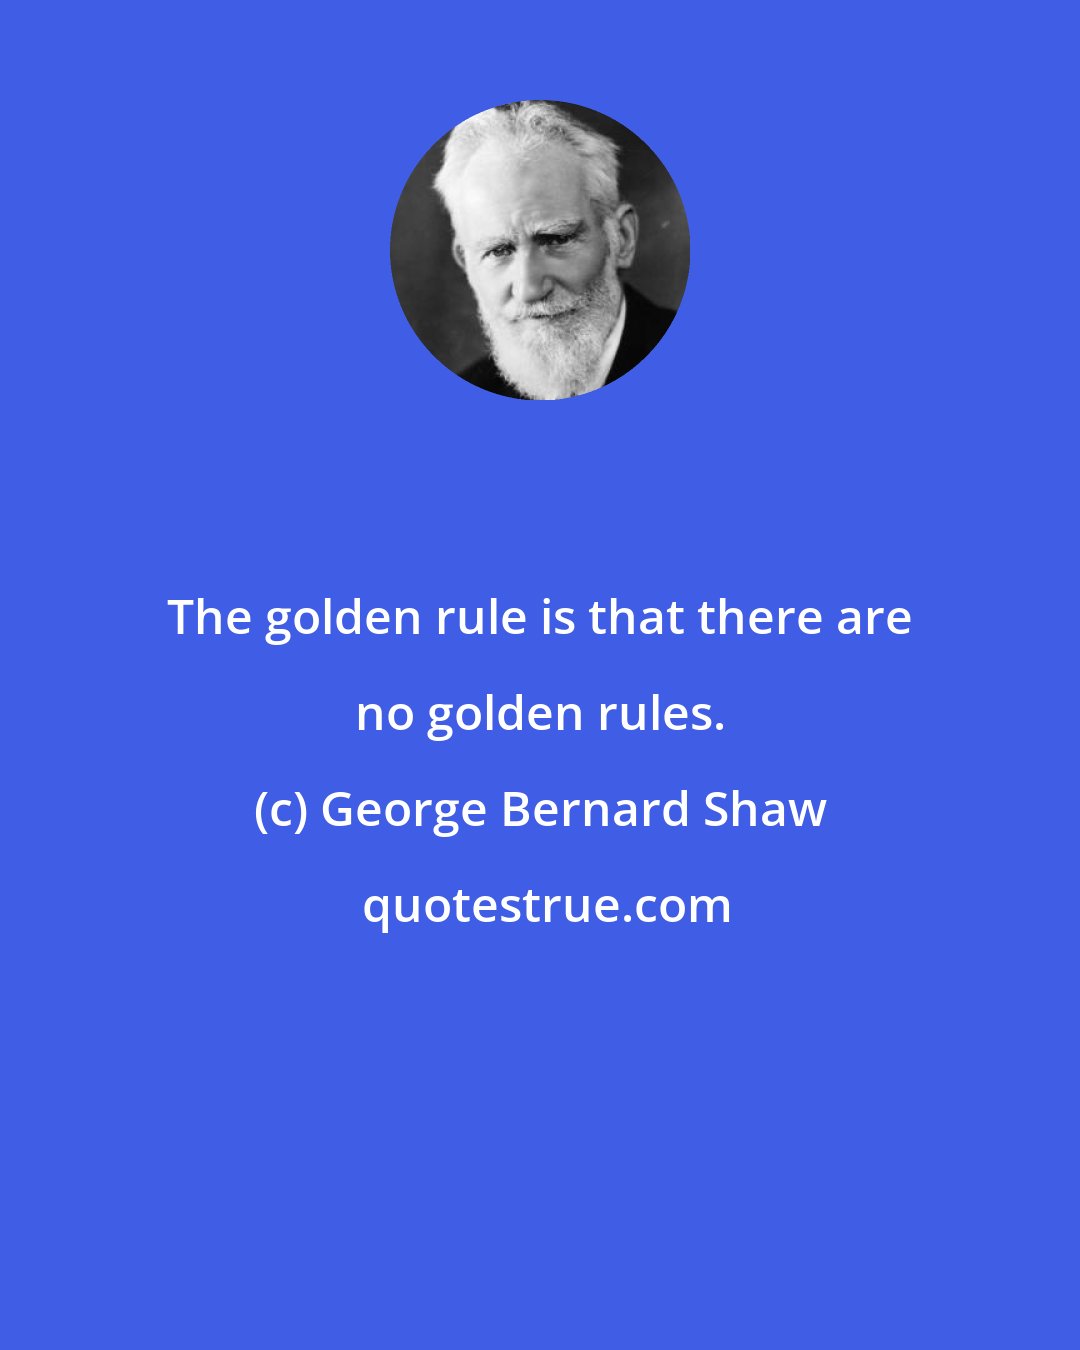 George Bernard Shaw: The golden rule is that there are no golden rules.